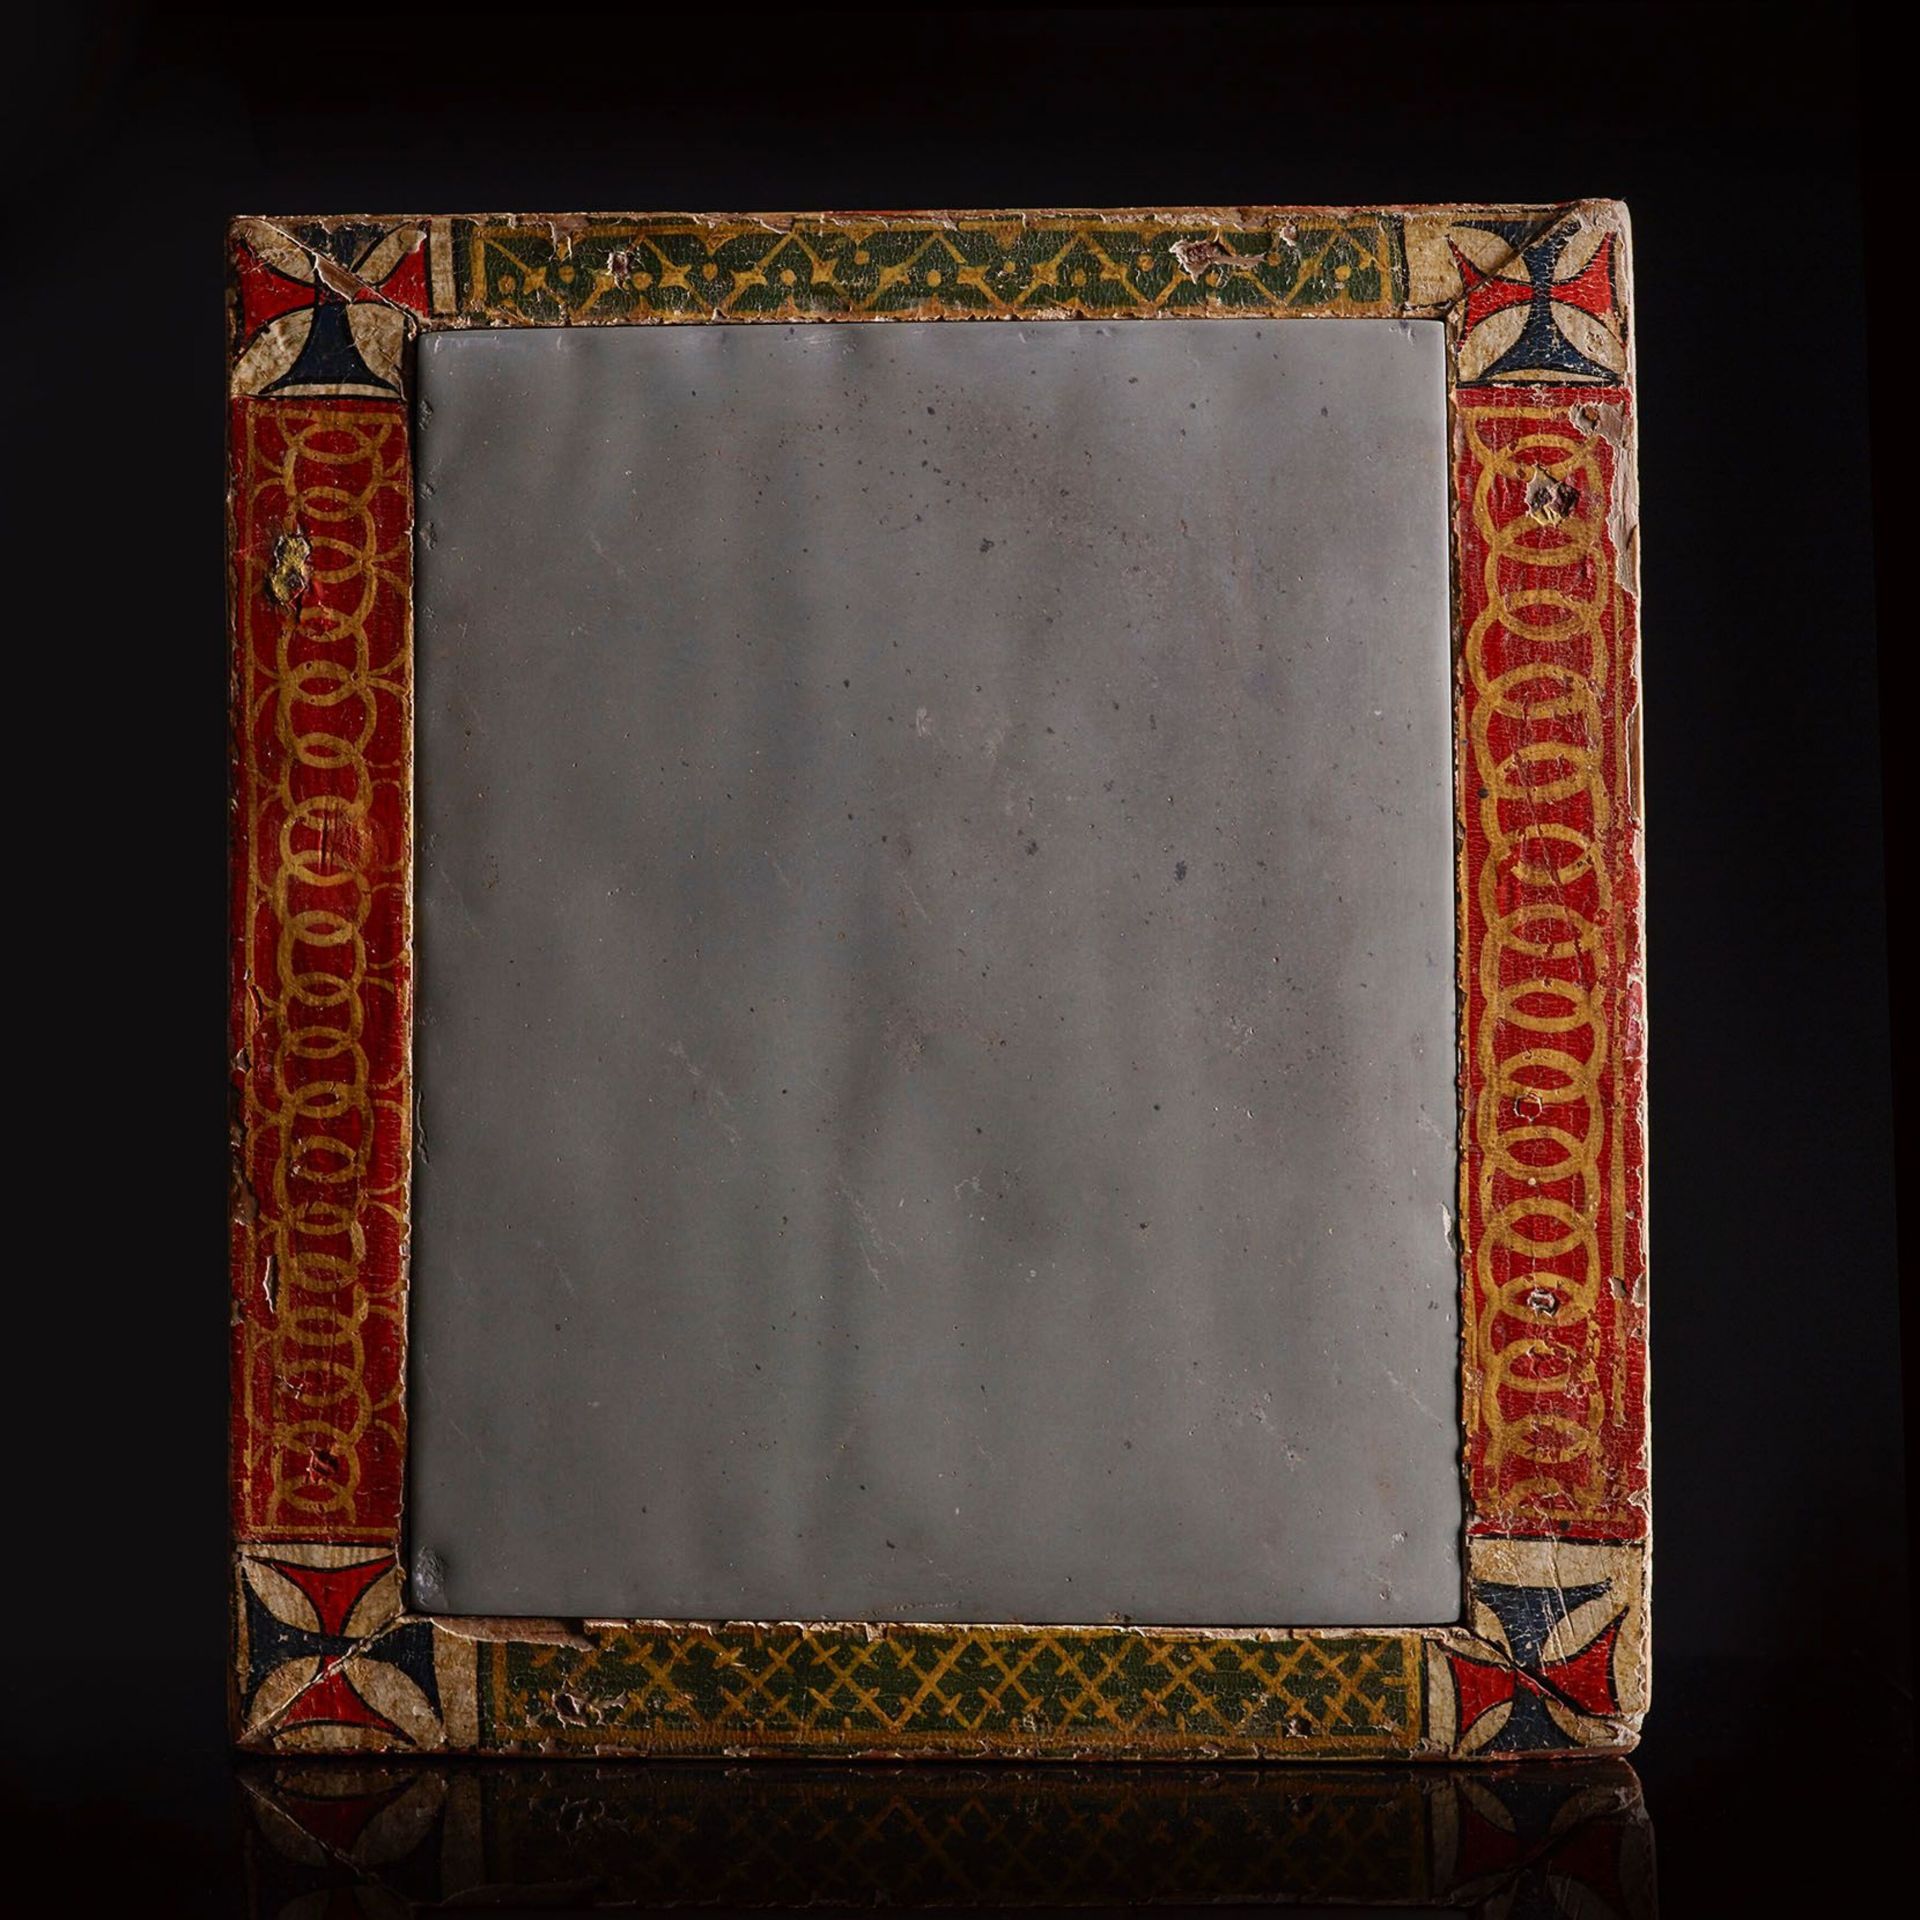 Important Gilt and Polychromed Frame, Tuscany, Italy, 14th to 15th Century